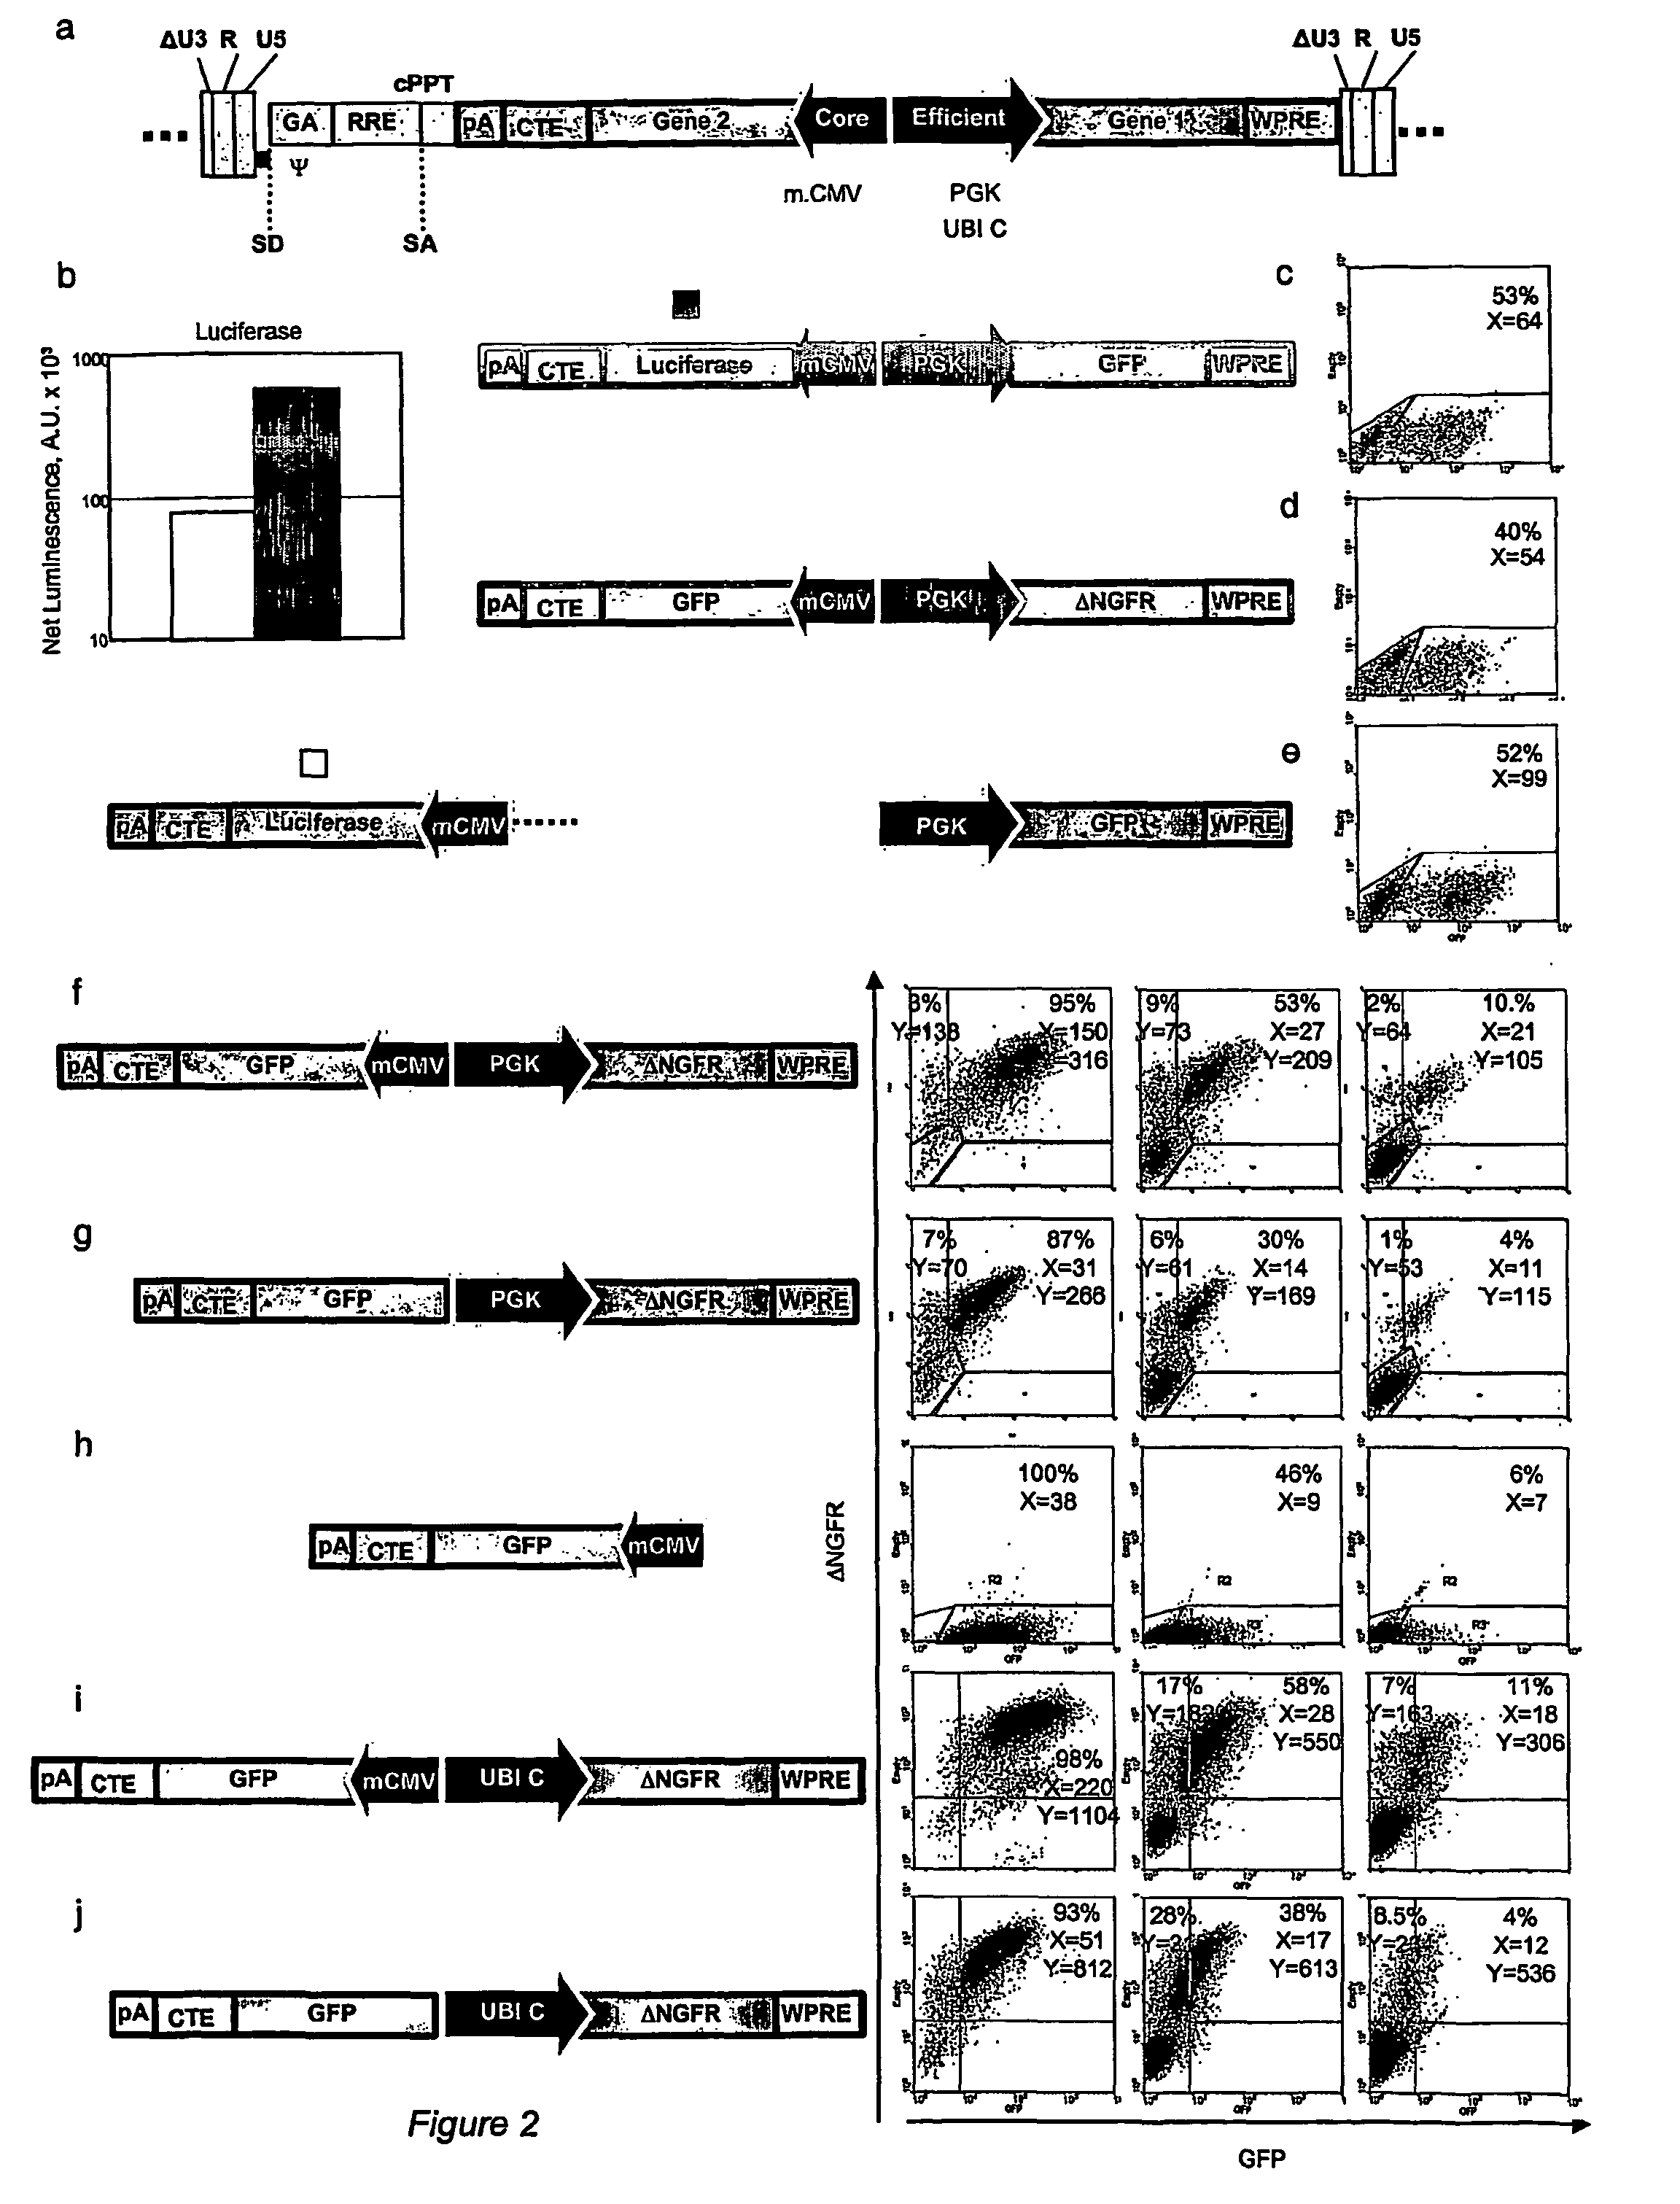 Lentiviral vectors carrying synthetic bi-directional promoters and uses thereof